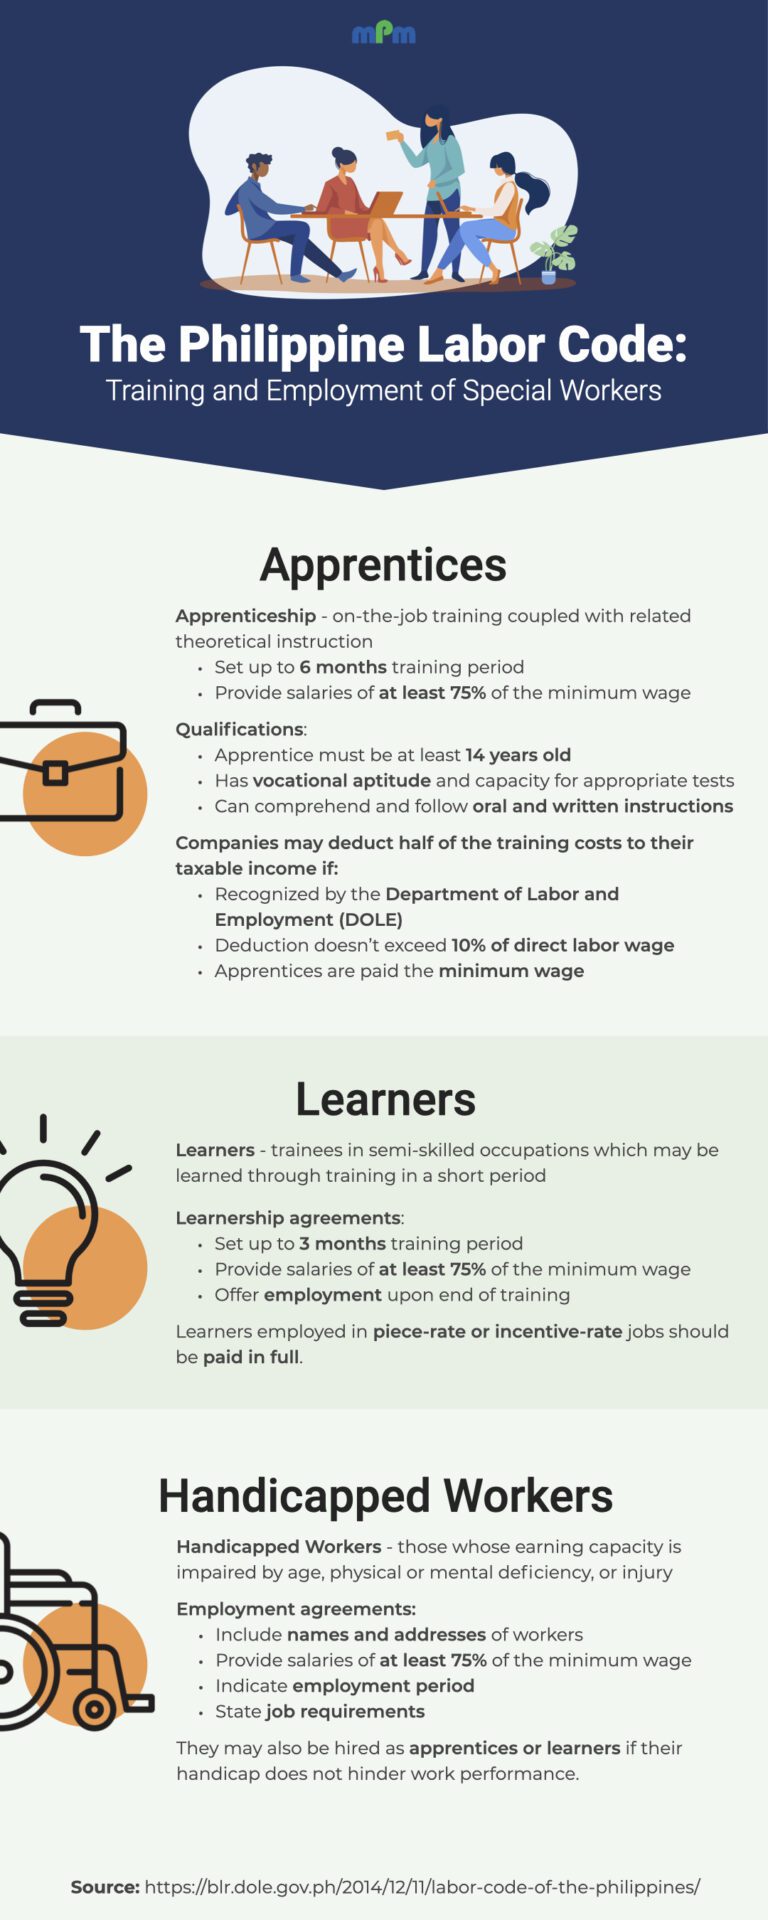 Philippine Labor Code Infographic for Businesses MPM